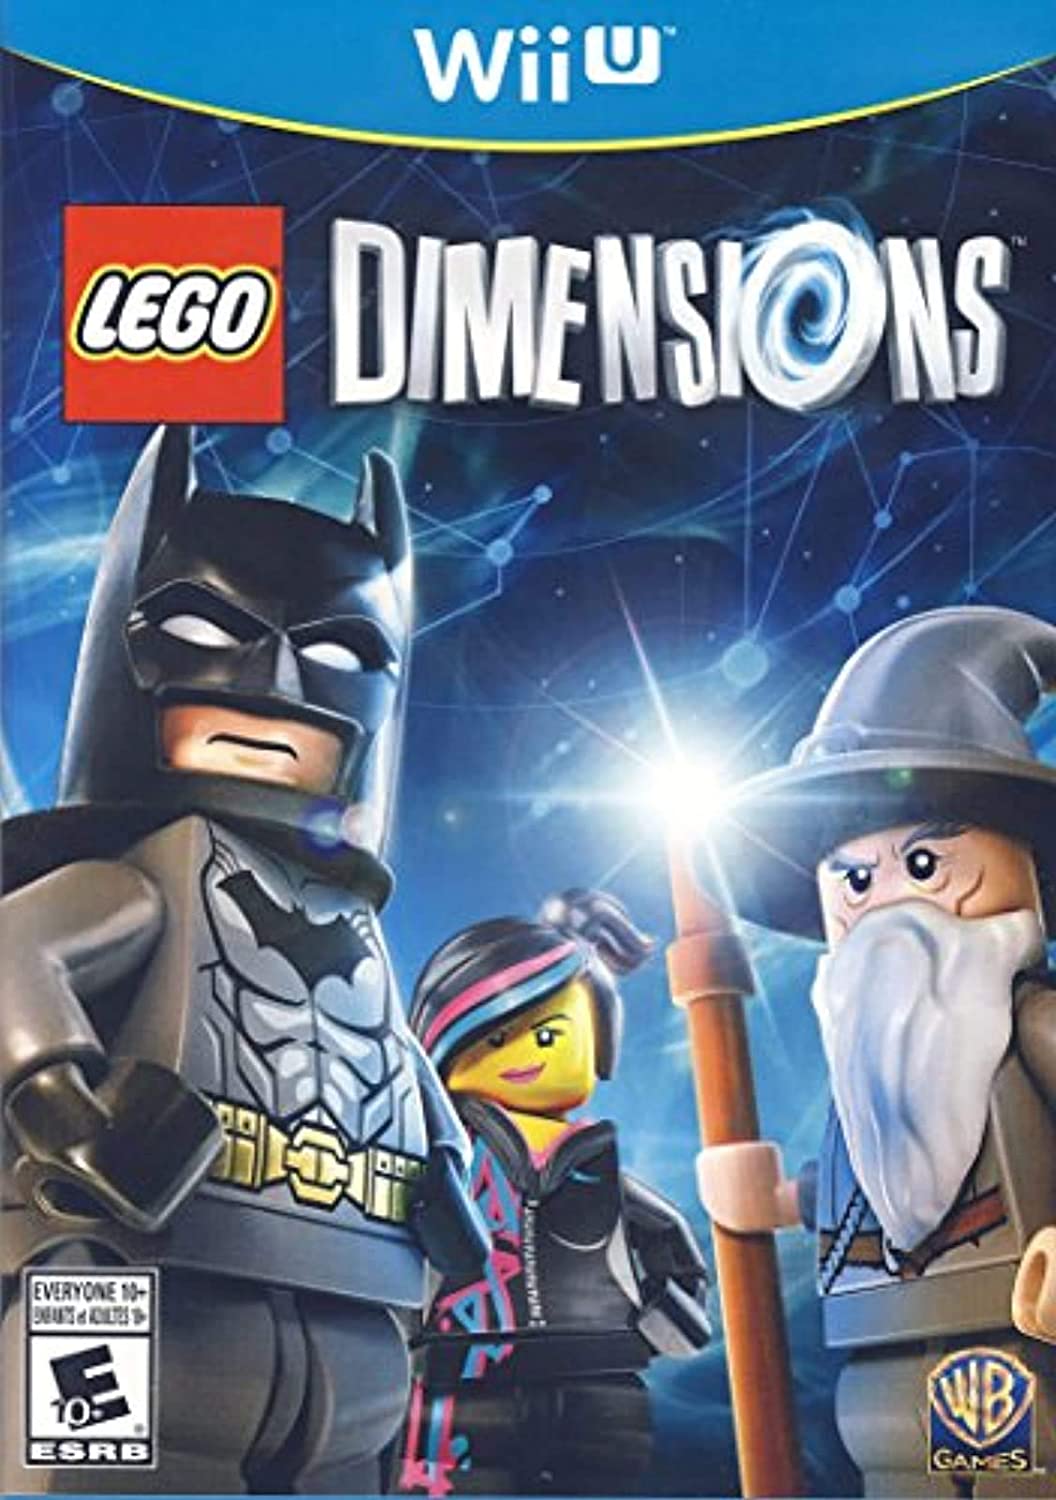 LEGO Dimensions (Game Disc Only) - Nintendo Wii U